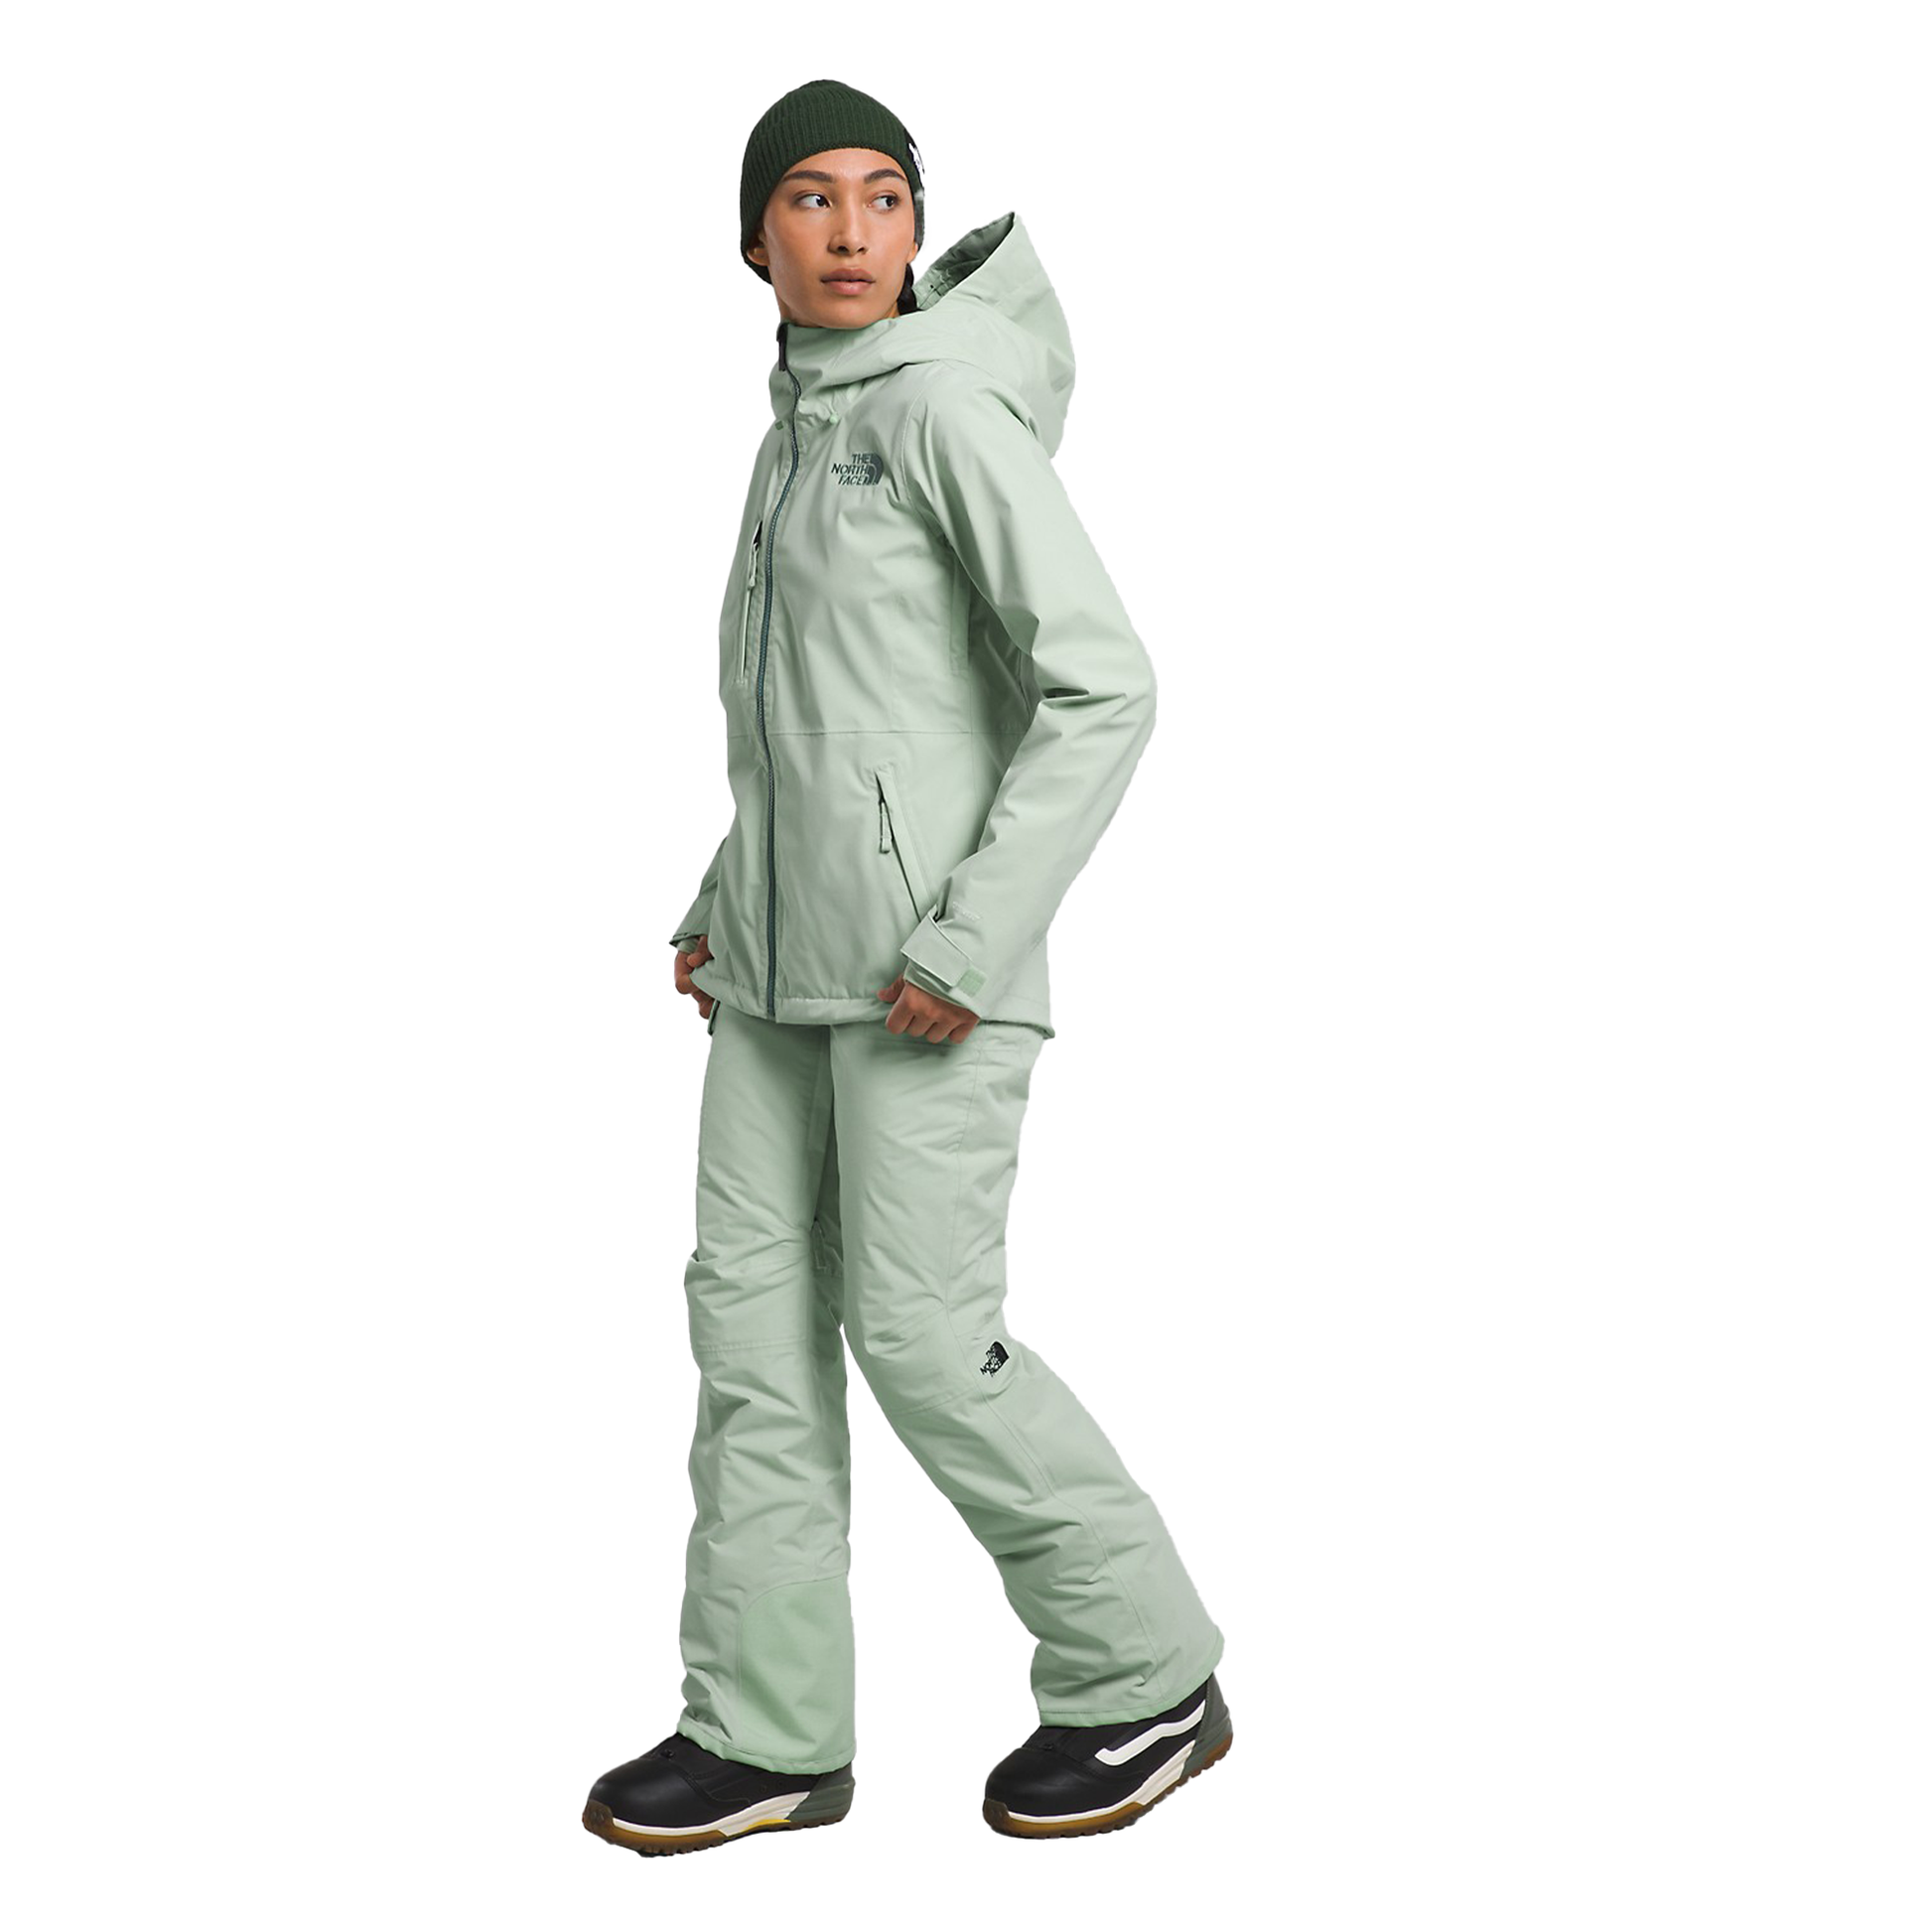 The North Face Women's Freedom Stretch Jacket Misty Sage XS Snow Jackets